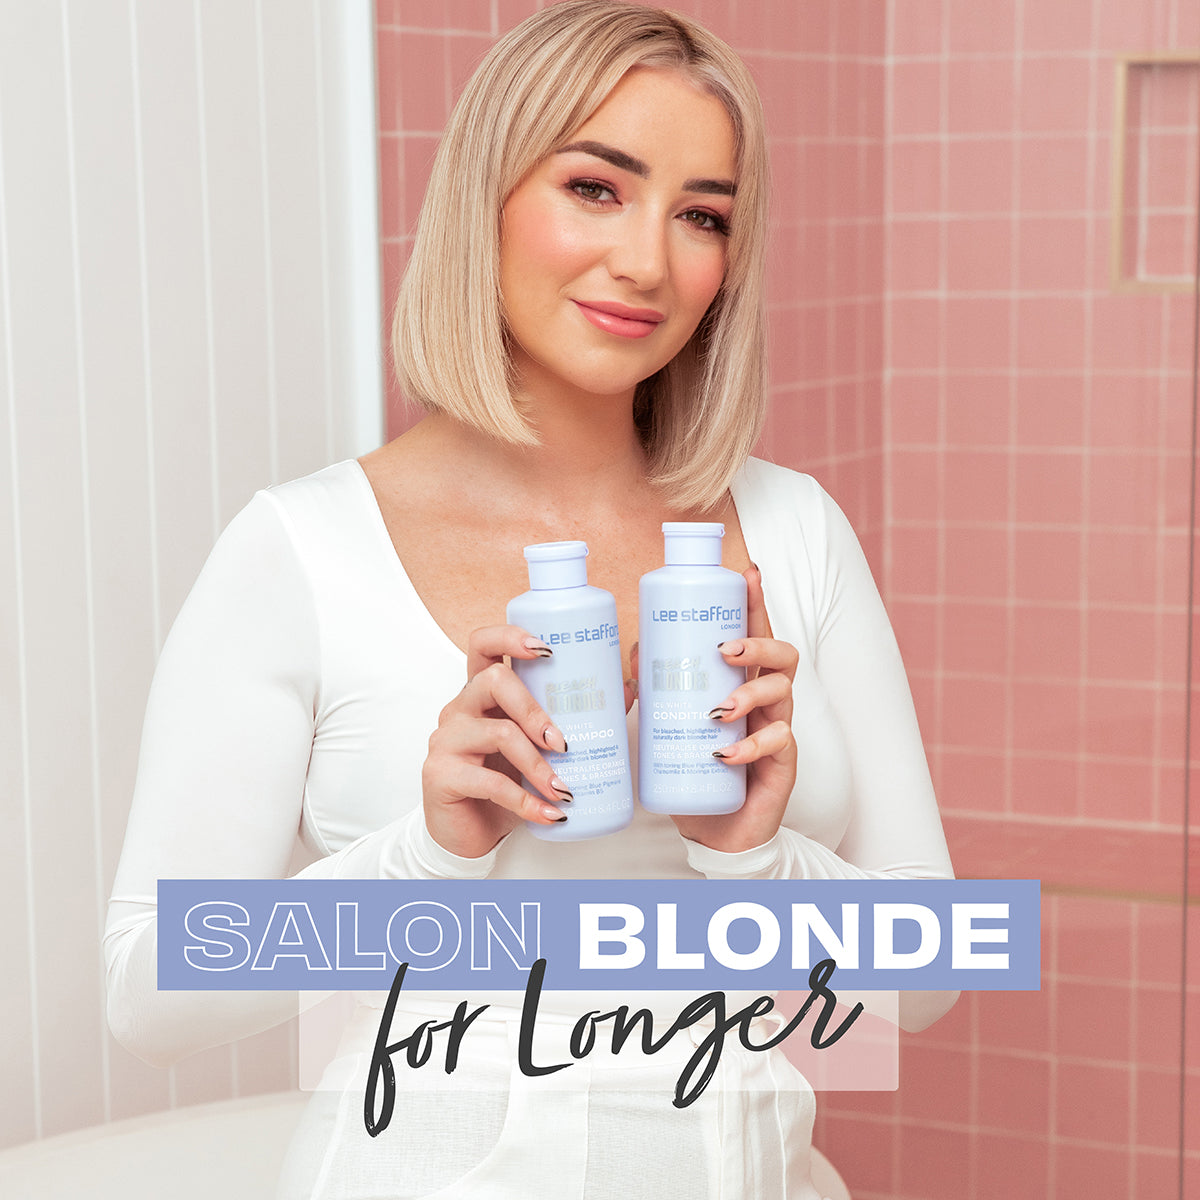 Stafford MAKEUP White LUCY Toning Blondes Ice MALTA Bleach STORE - Lee Shampoo